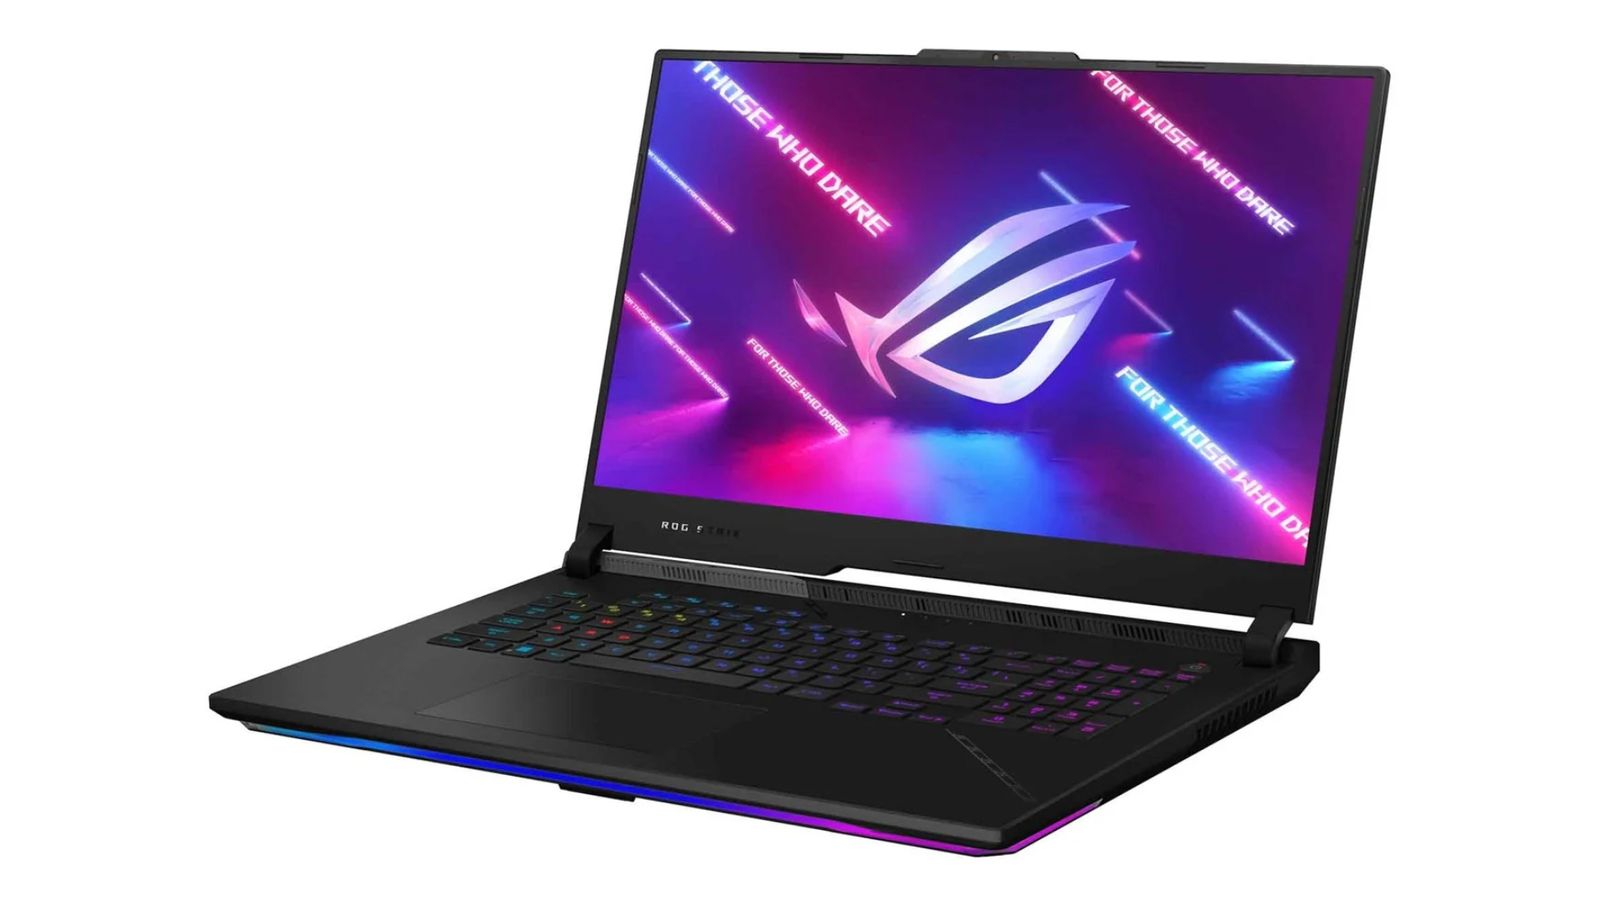 ASUS Strix Scar 17 product image of a black laptop featuring multicoloured back-lit keys and blue, purple, and red ASUS branding on the display.